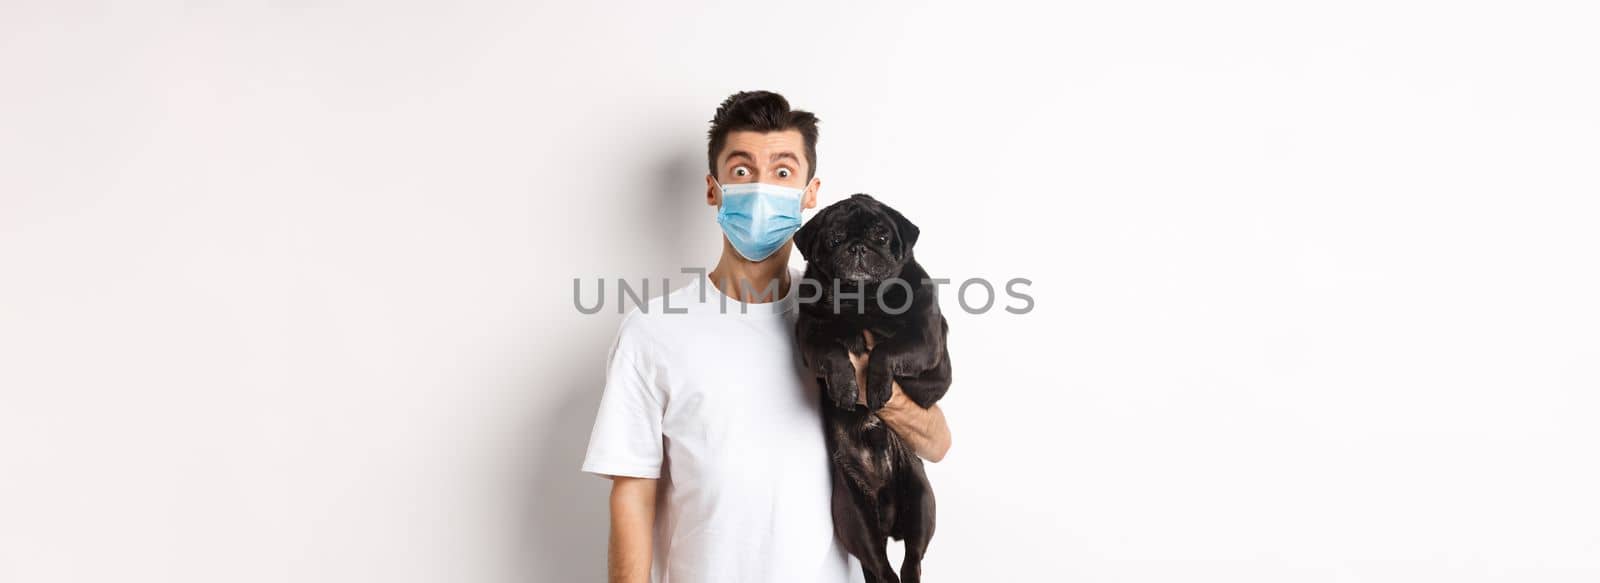 Covid-19, animals and quarantine concept. Funny young man in medical mask holding cute black pug dog, standing over white background.